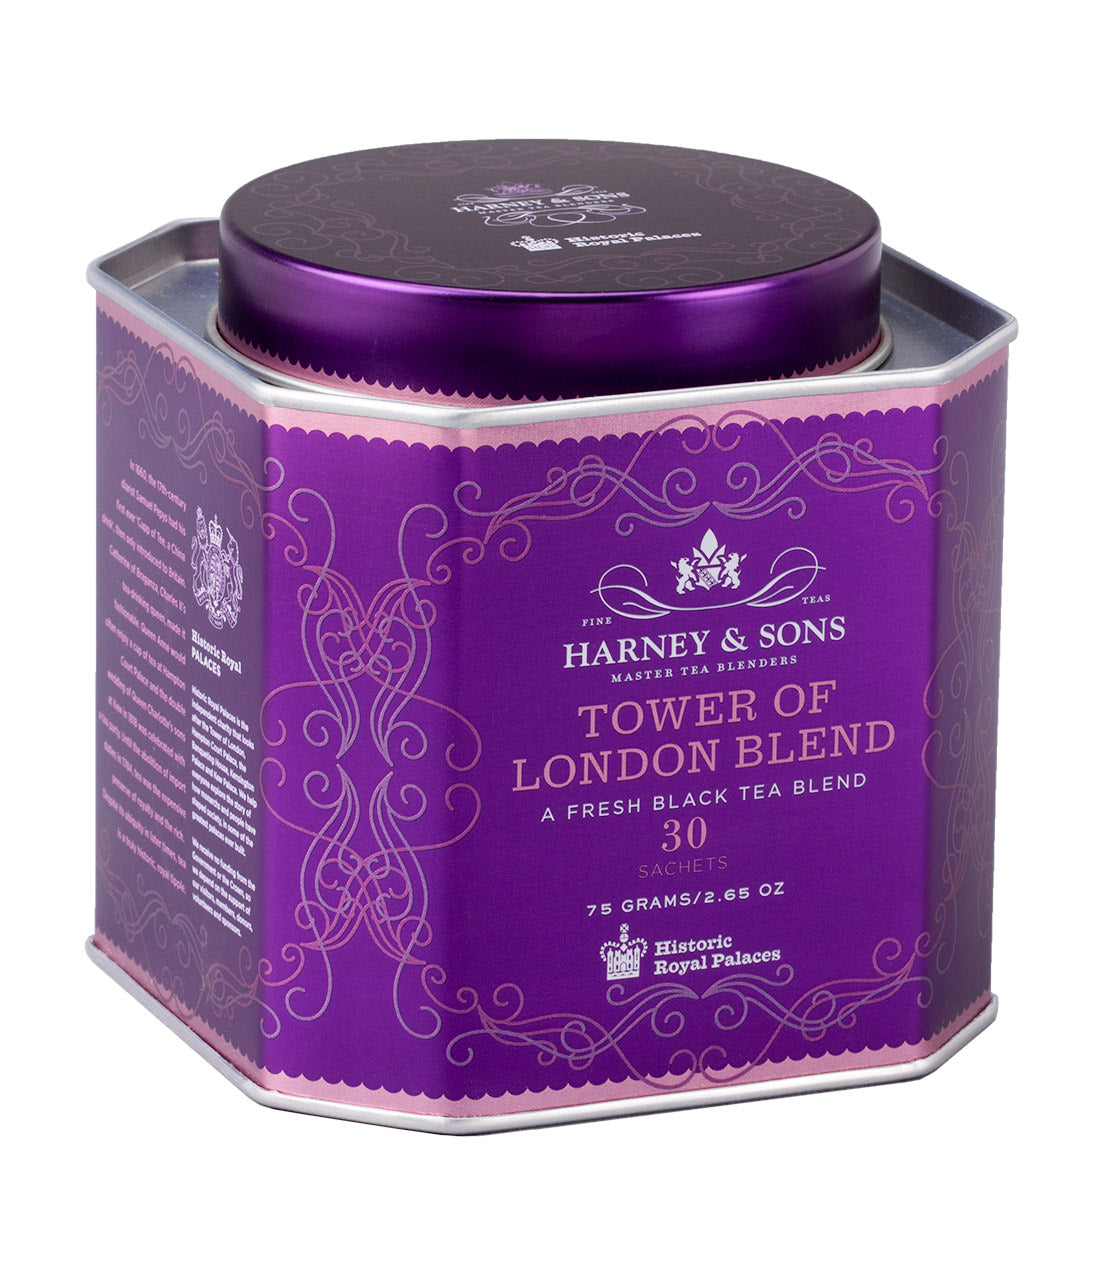 Tower of London Blend, HRP Tin of 30 Sachets - Sachets HRP Tin of 30 Sachets - Harney & Sons Fine Teas